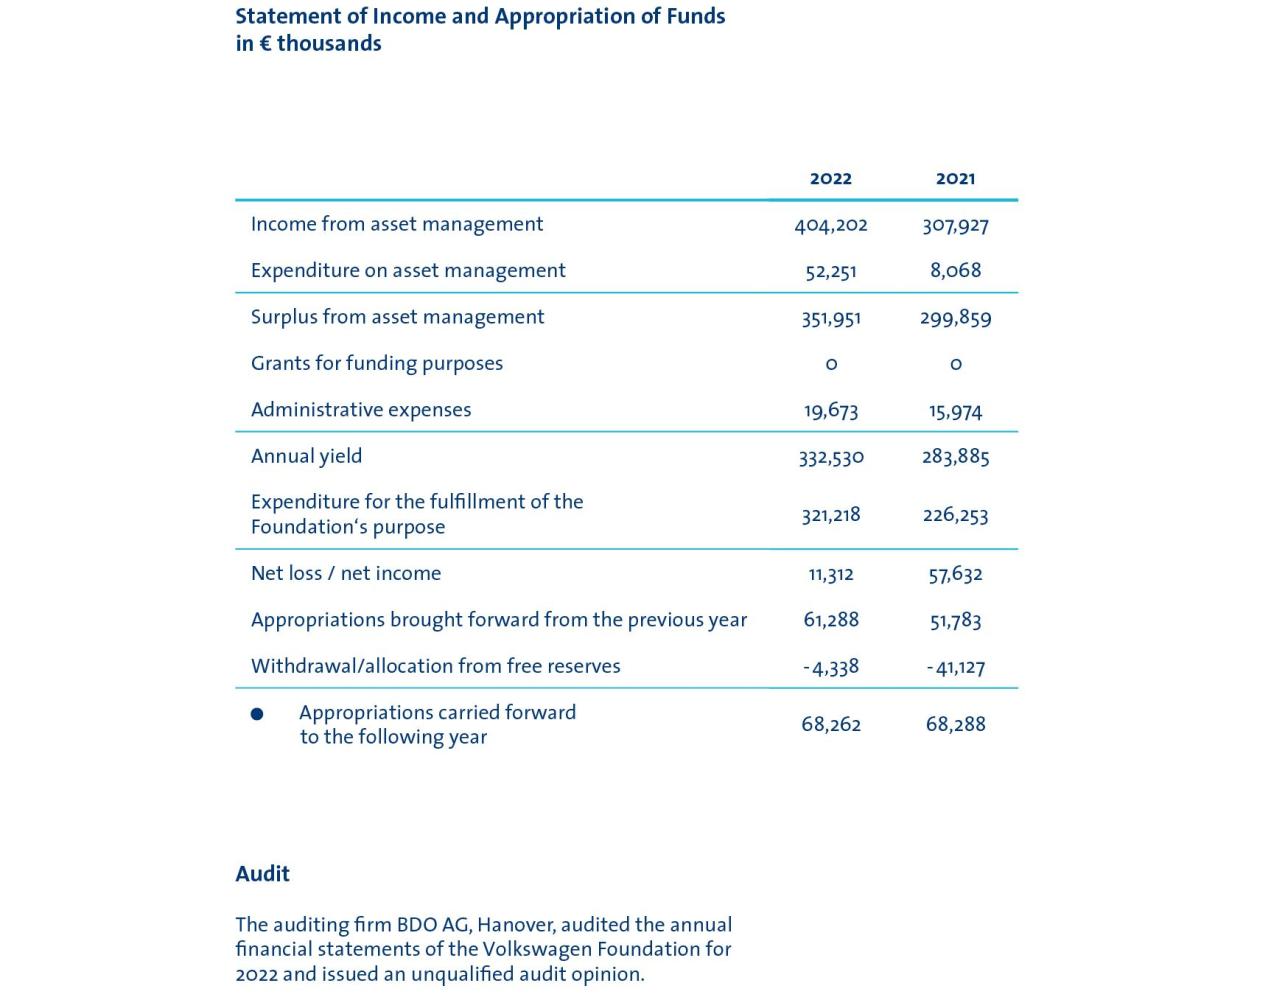 Table: statement of income and appropriation of funds